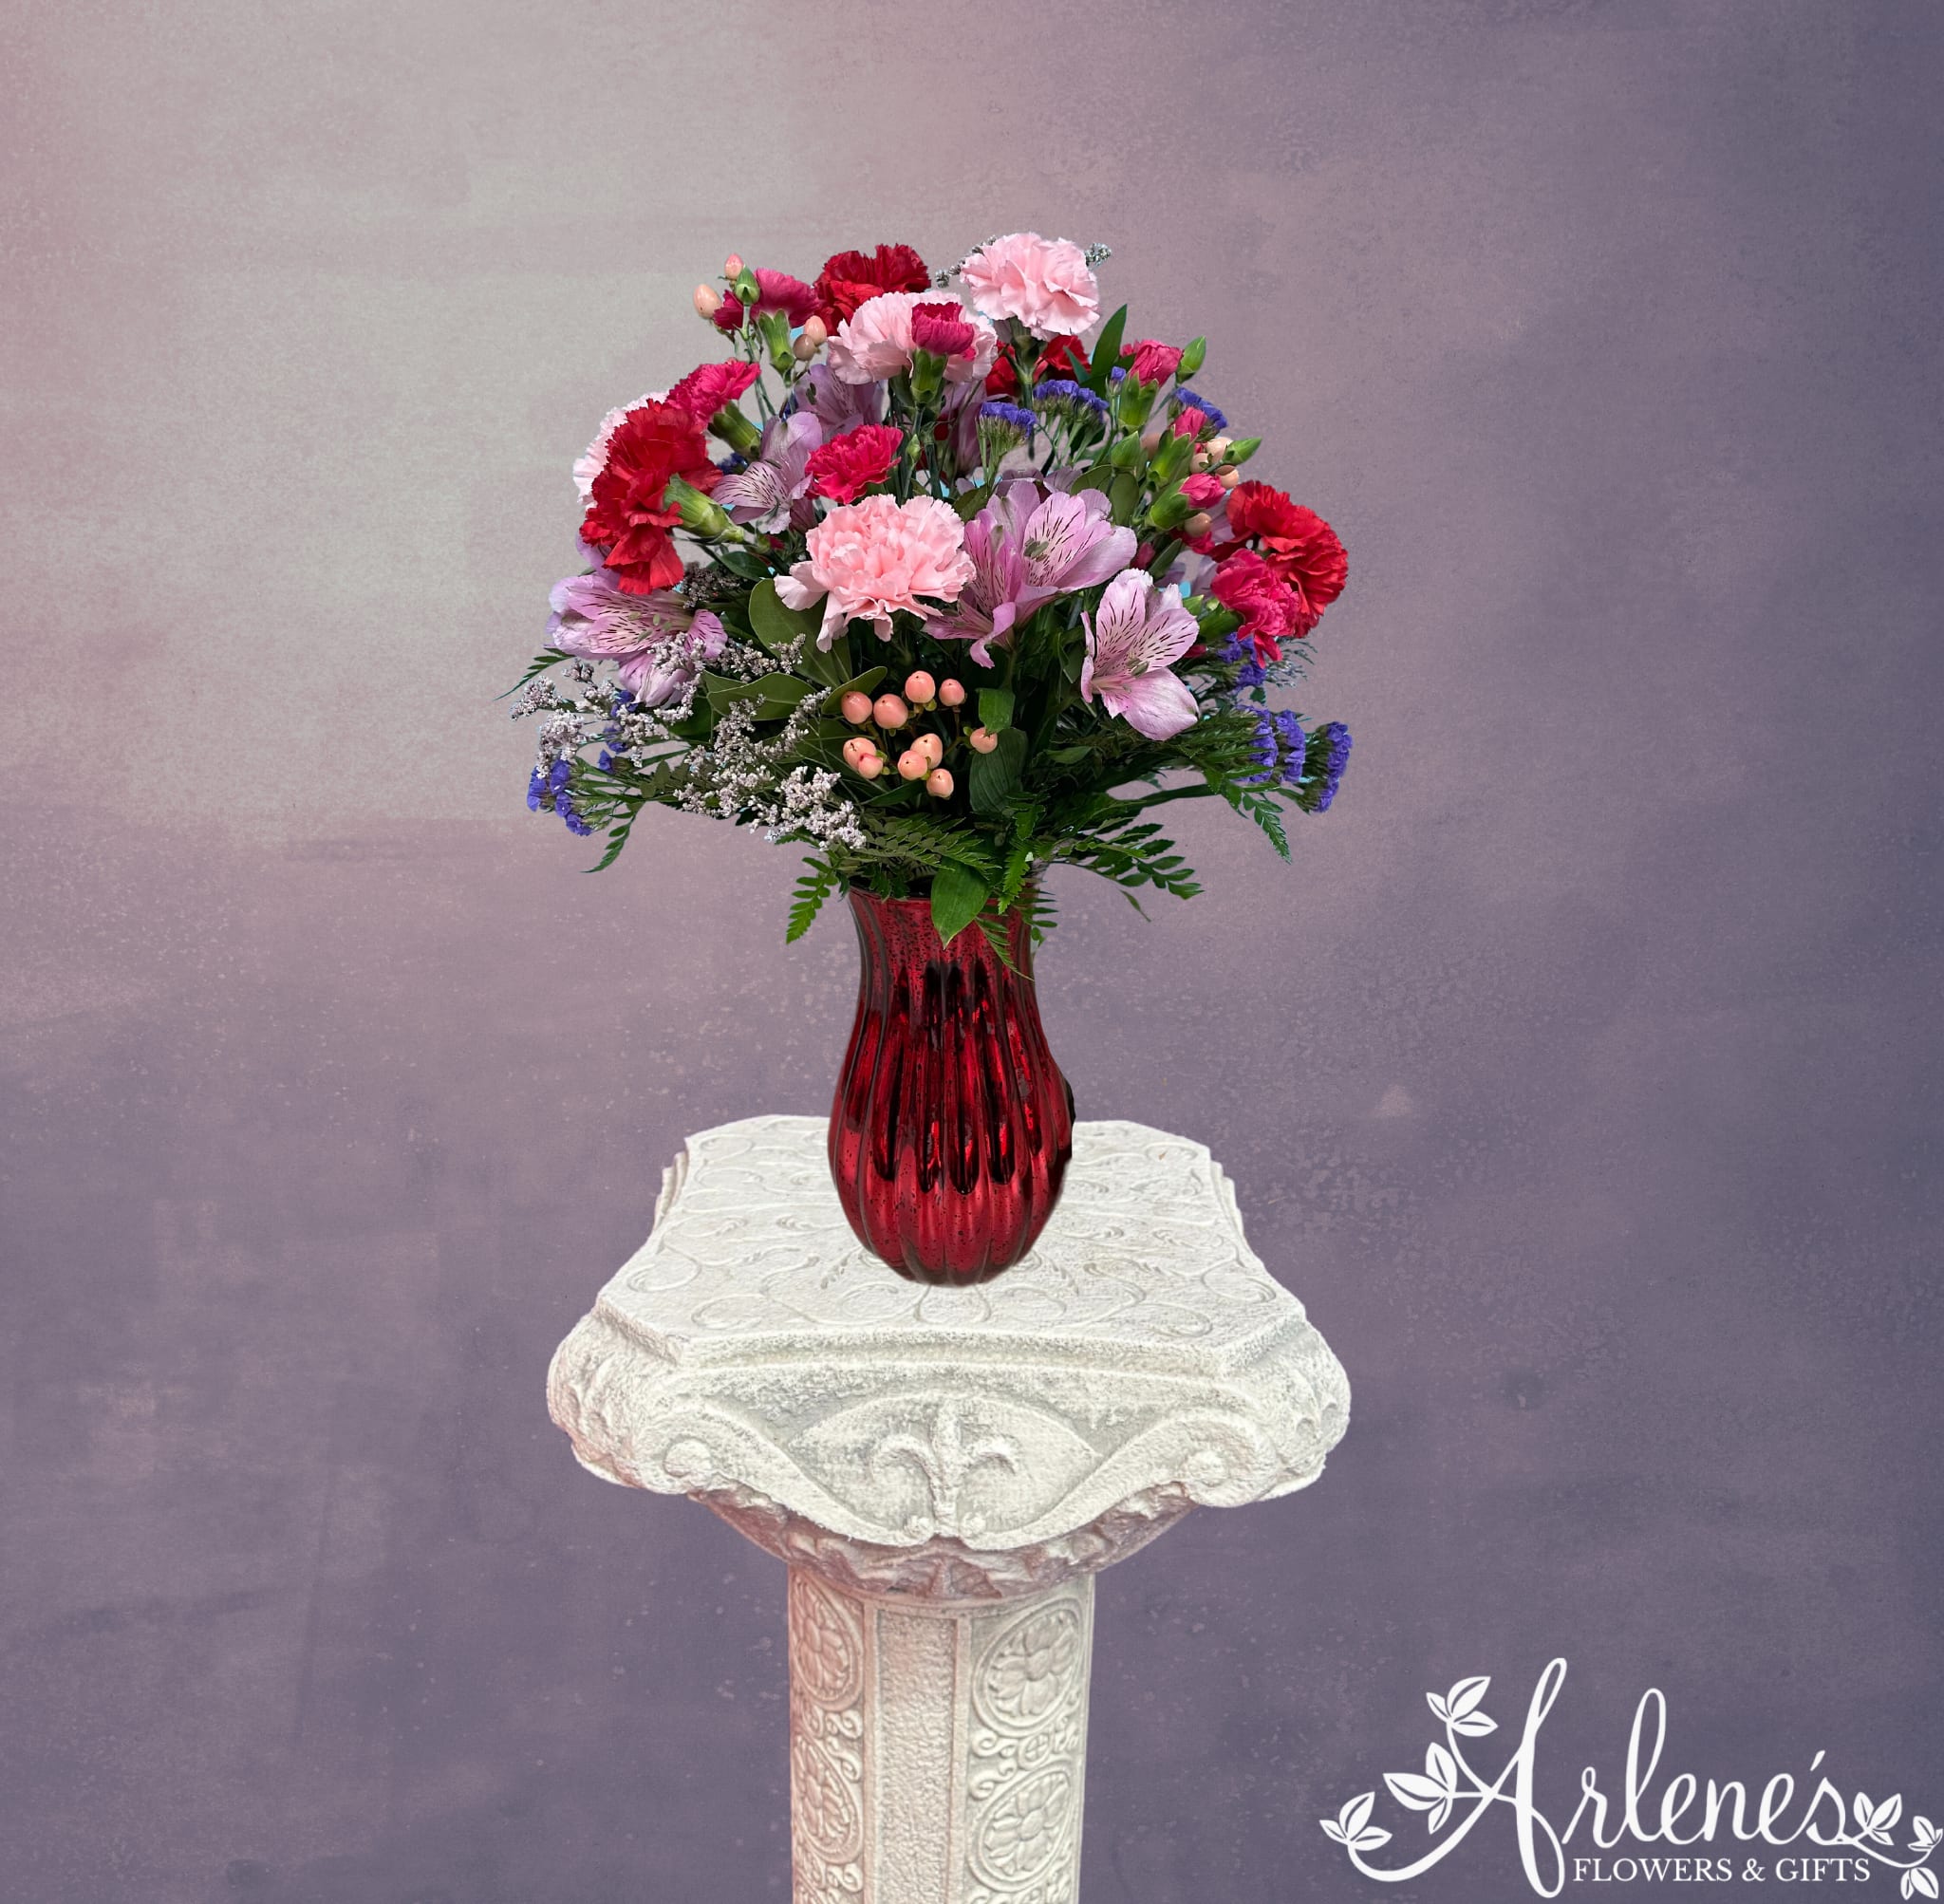 Everlasting Beauty Bouquet - A romantic bouquet with flowers that will last longer than a Hollywood marriage. A mix of red, pink and white carnations, Alstromeria and hypericum berries. 